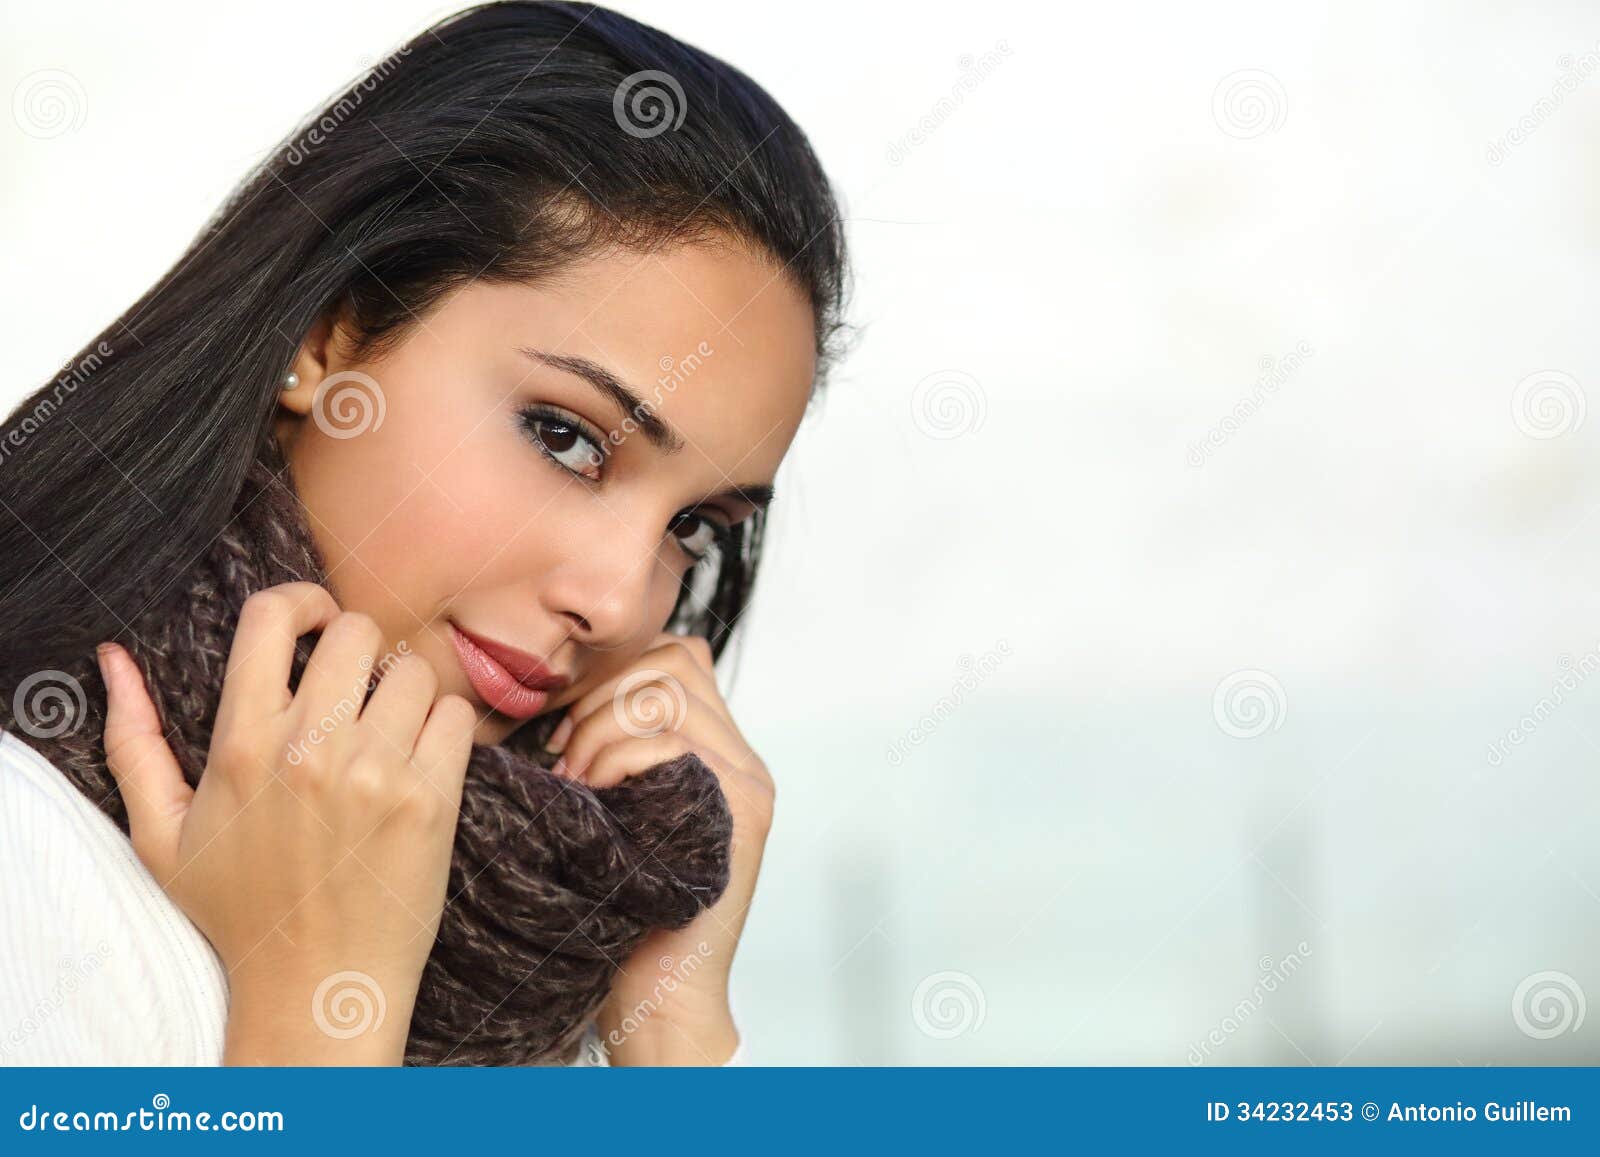 portrait of a beautiful arab woman face warmly clothed